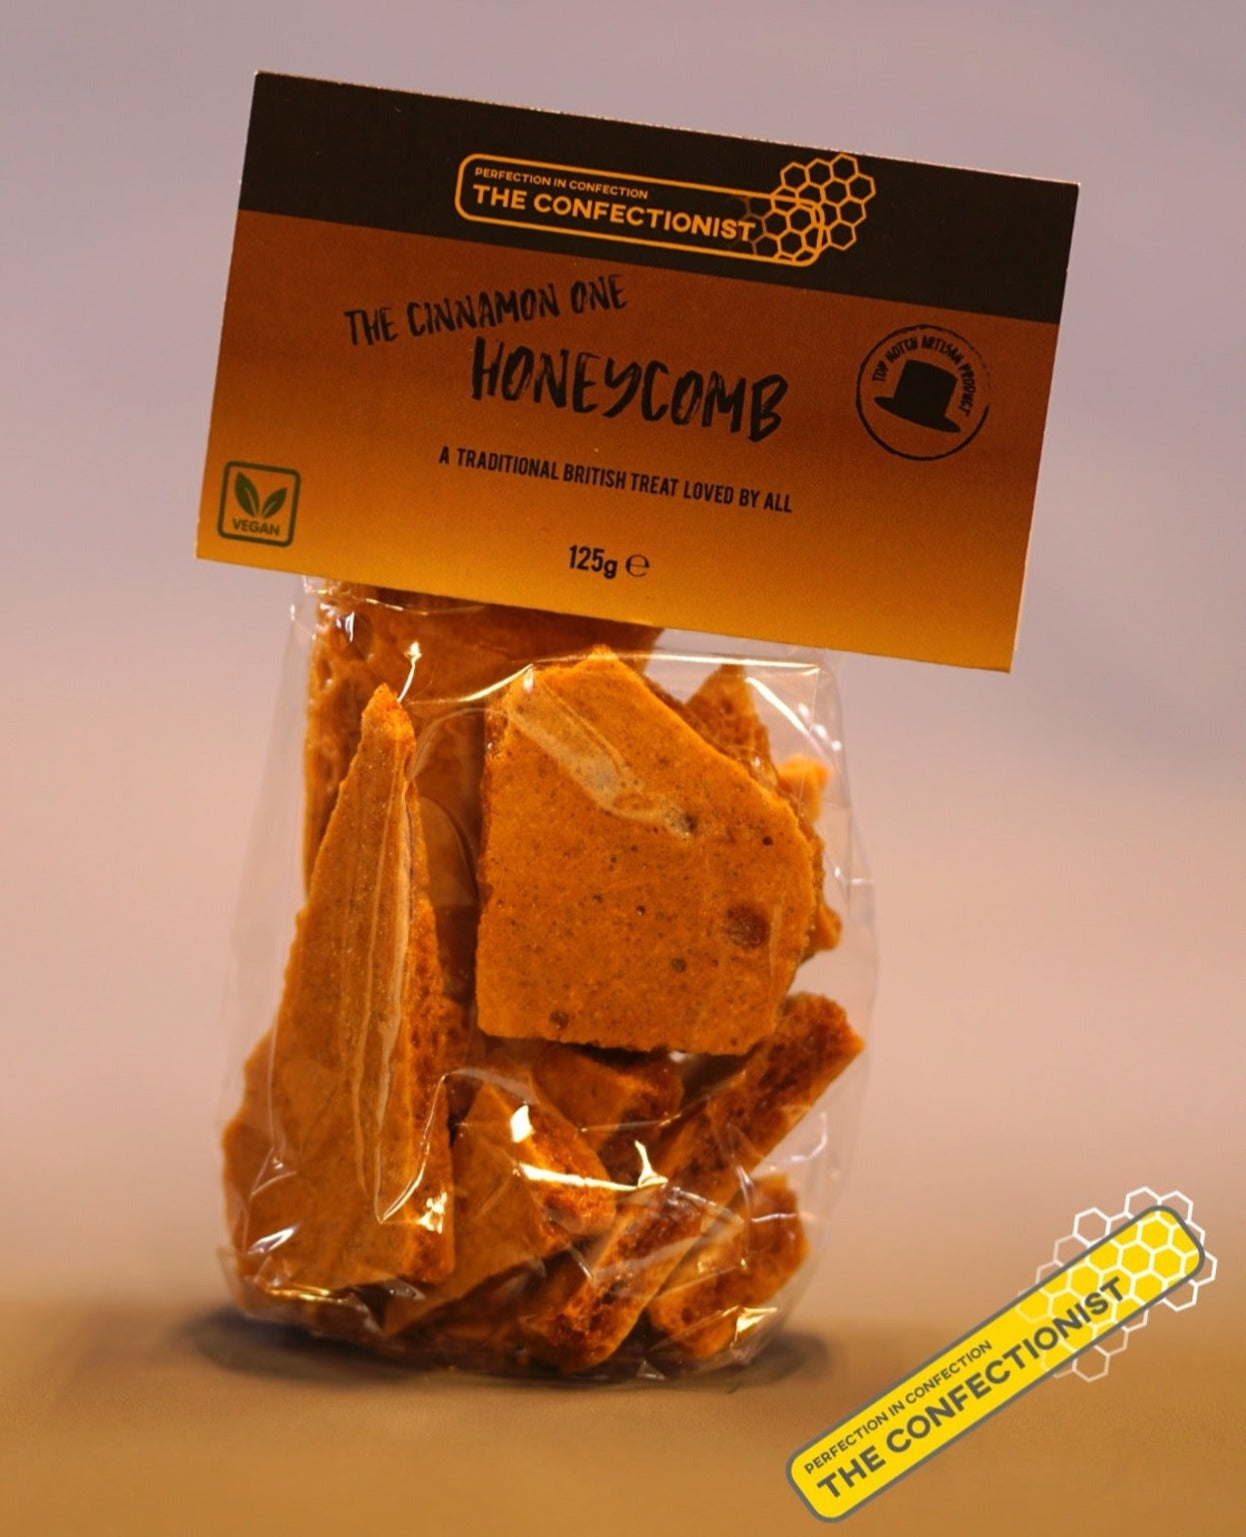 The Confectionist's Ginger Honeycomb 125g